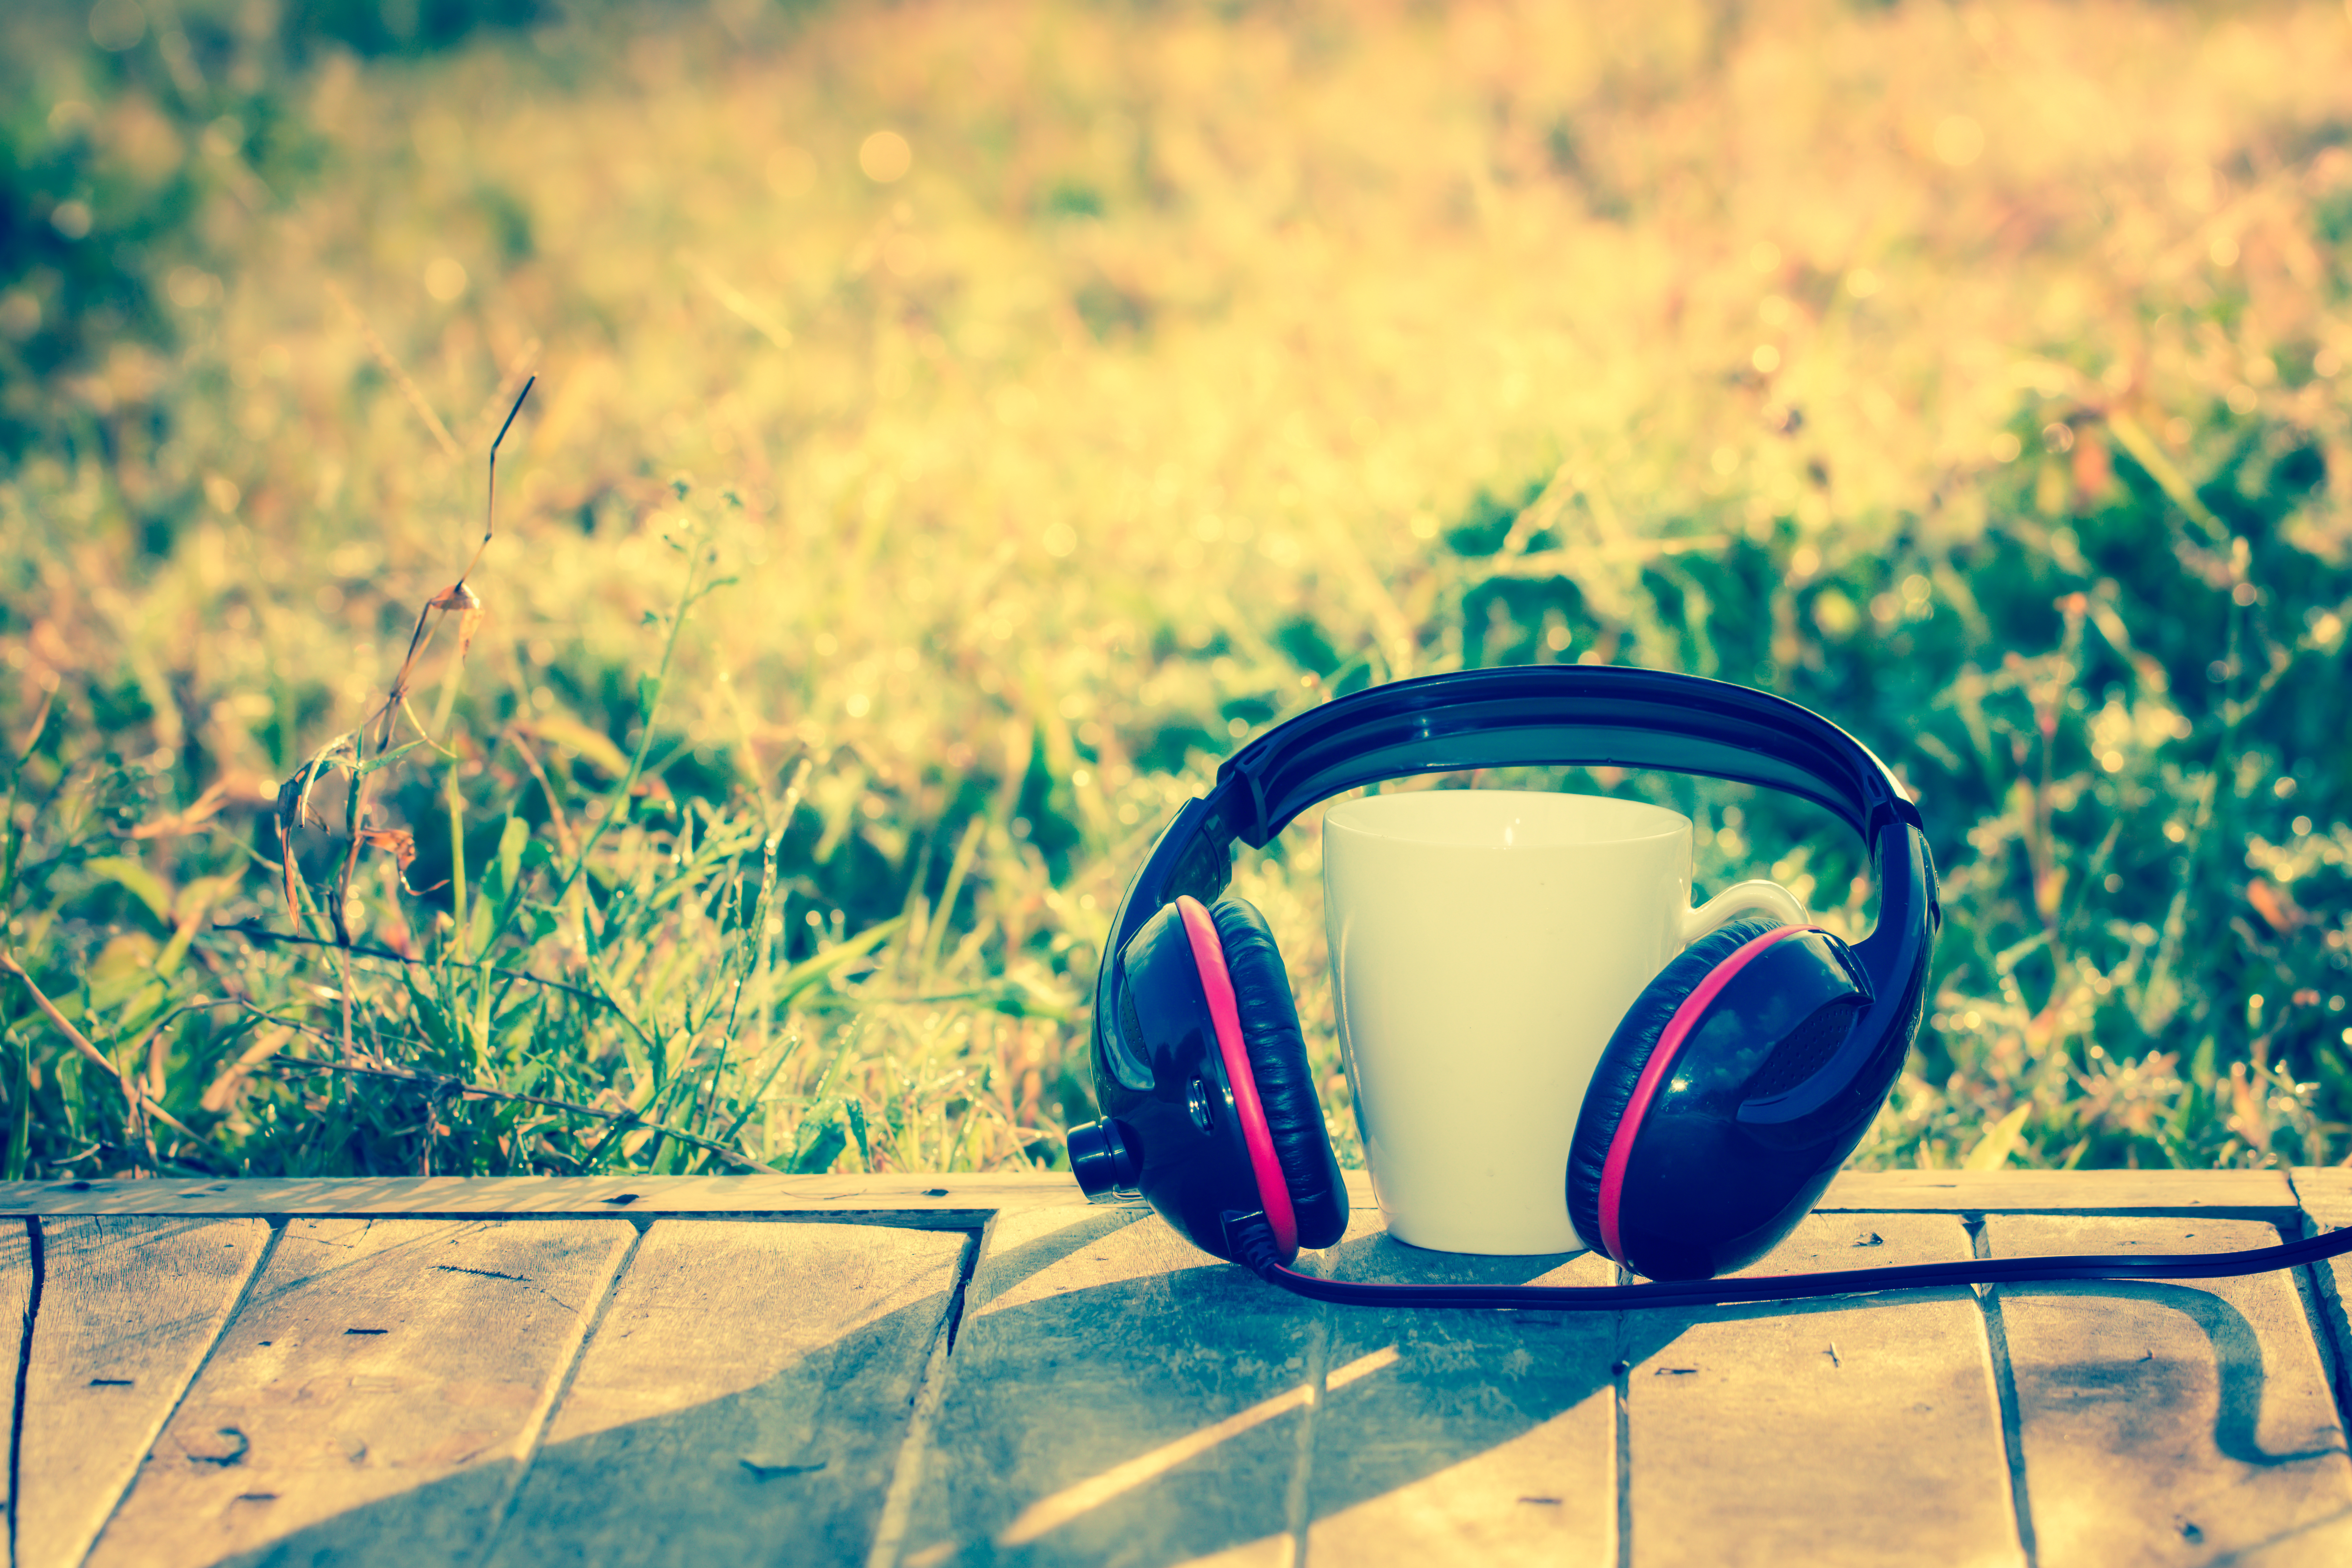 Does Music Enhance the Natural Flavor of Food?